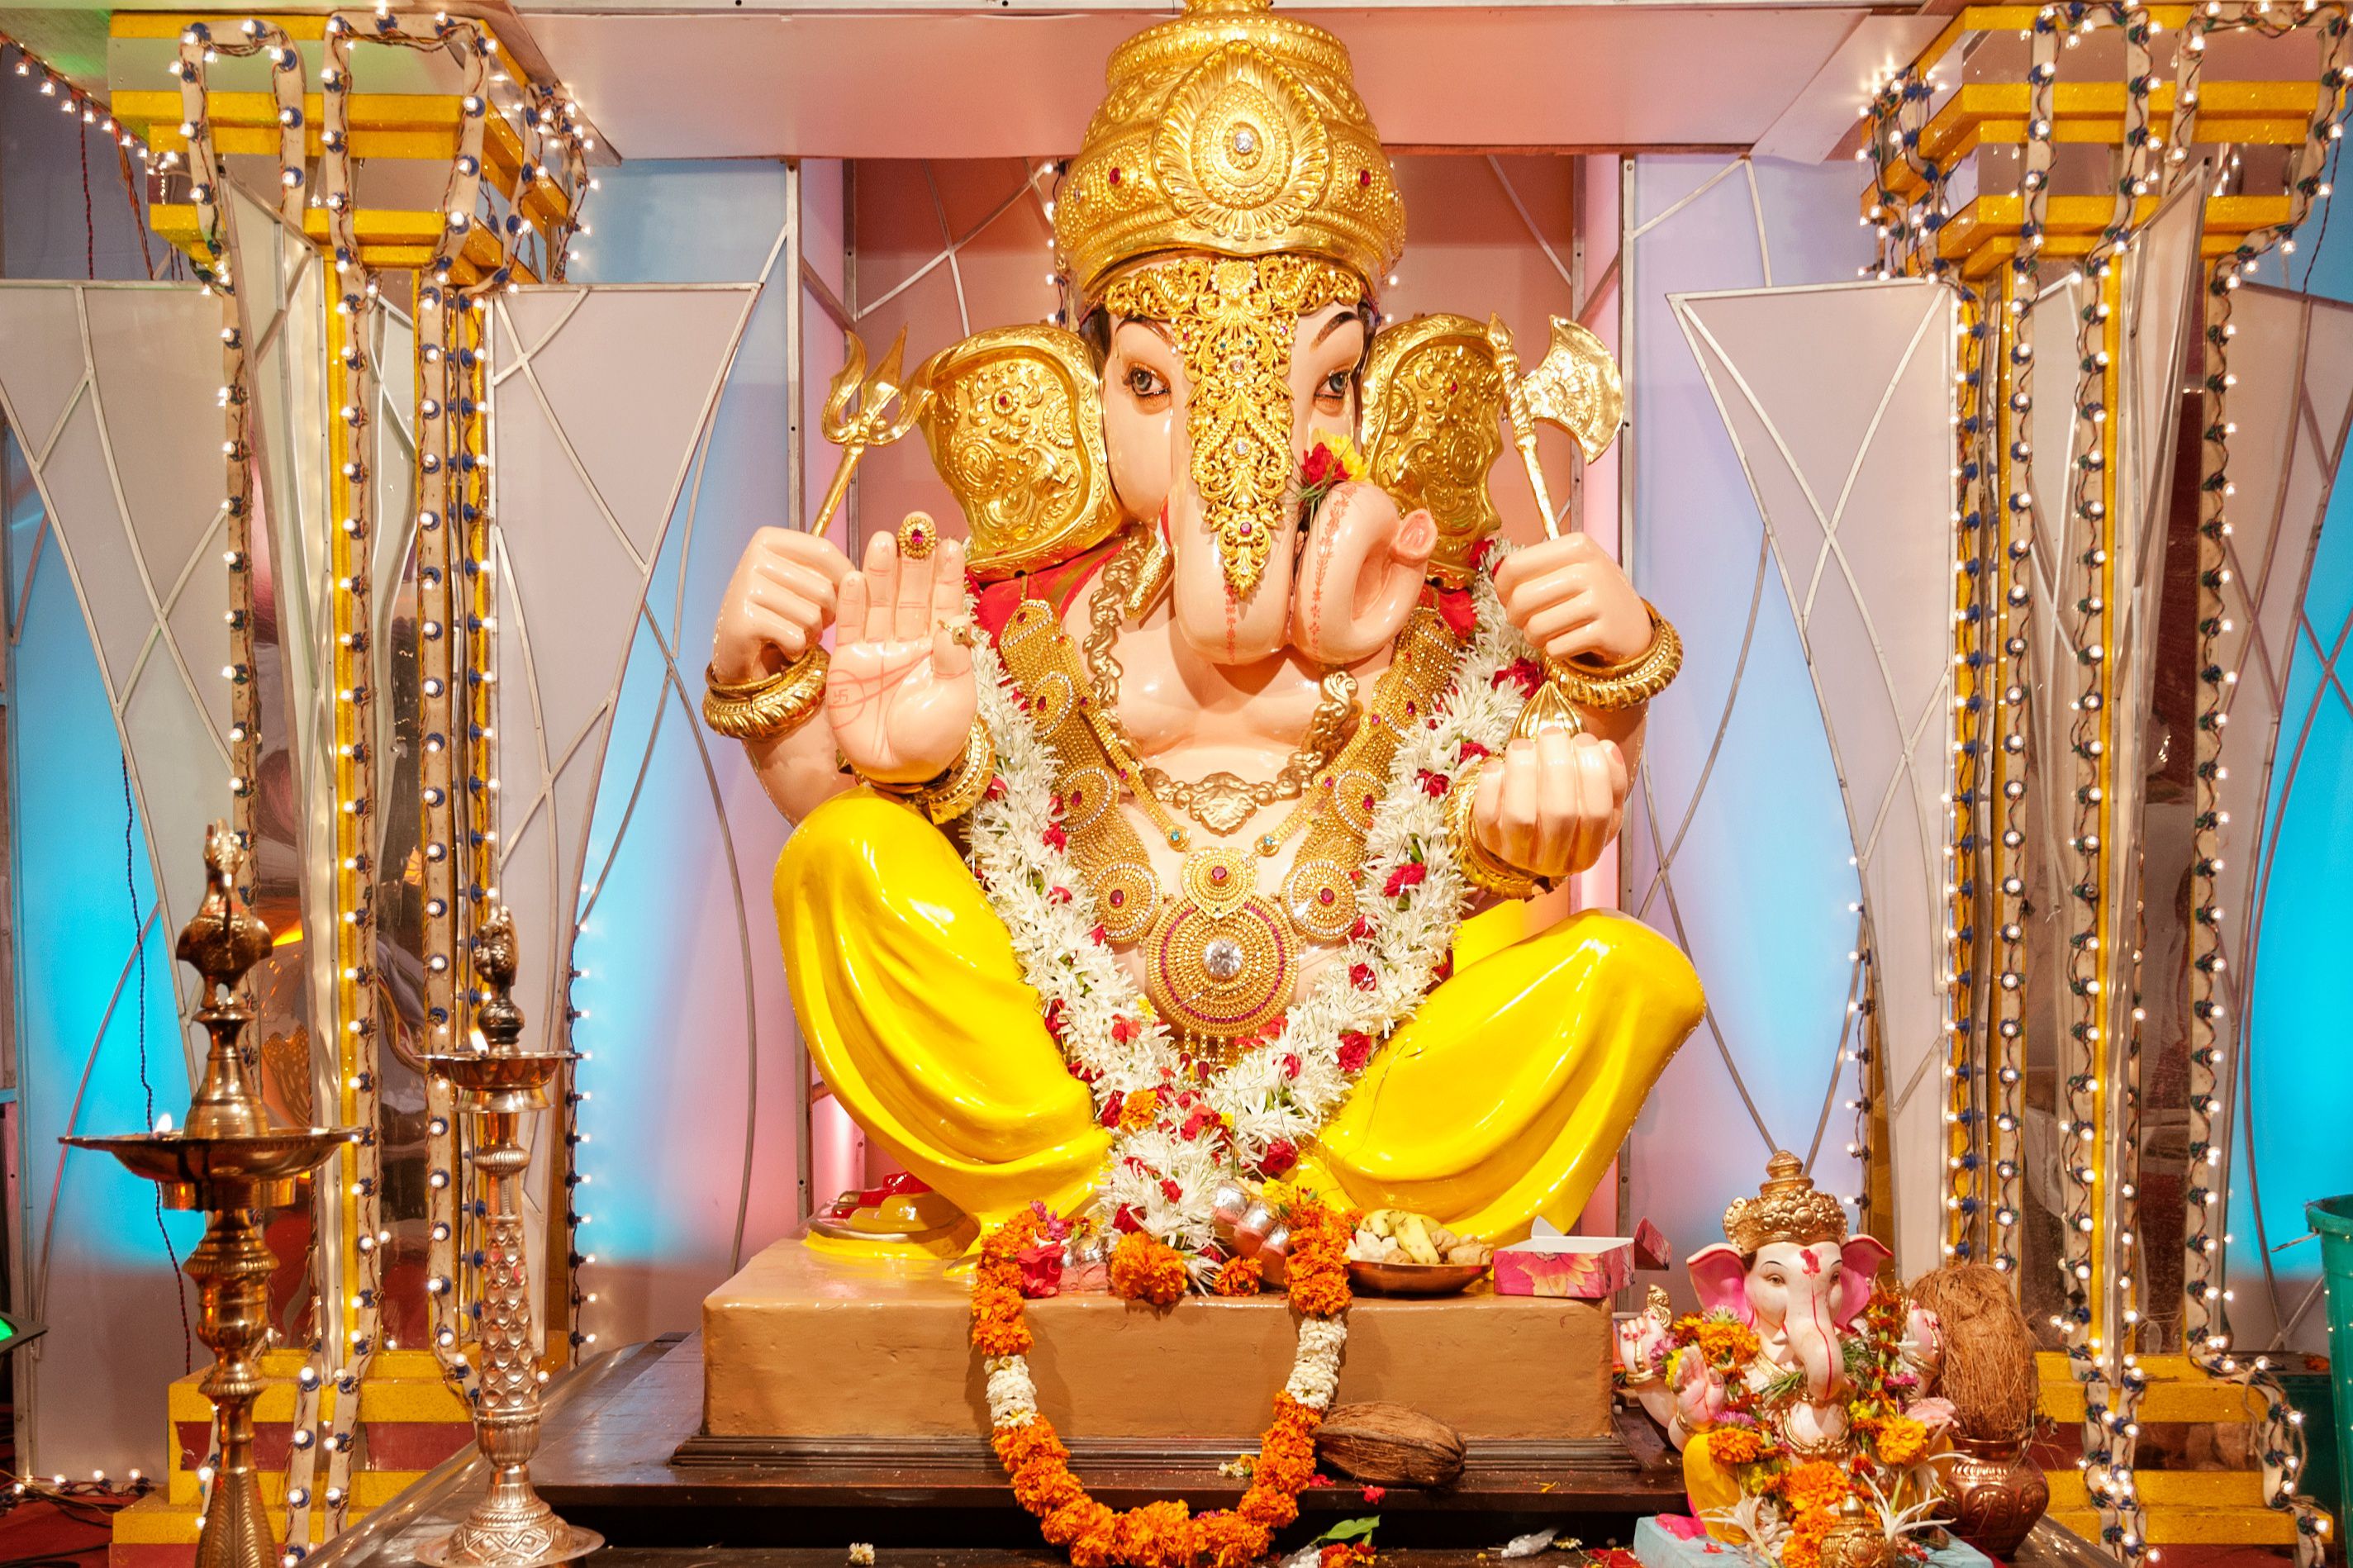 When is Ganesh Chaturthi in 2018, 2019 and 2020?